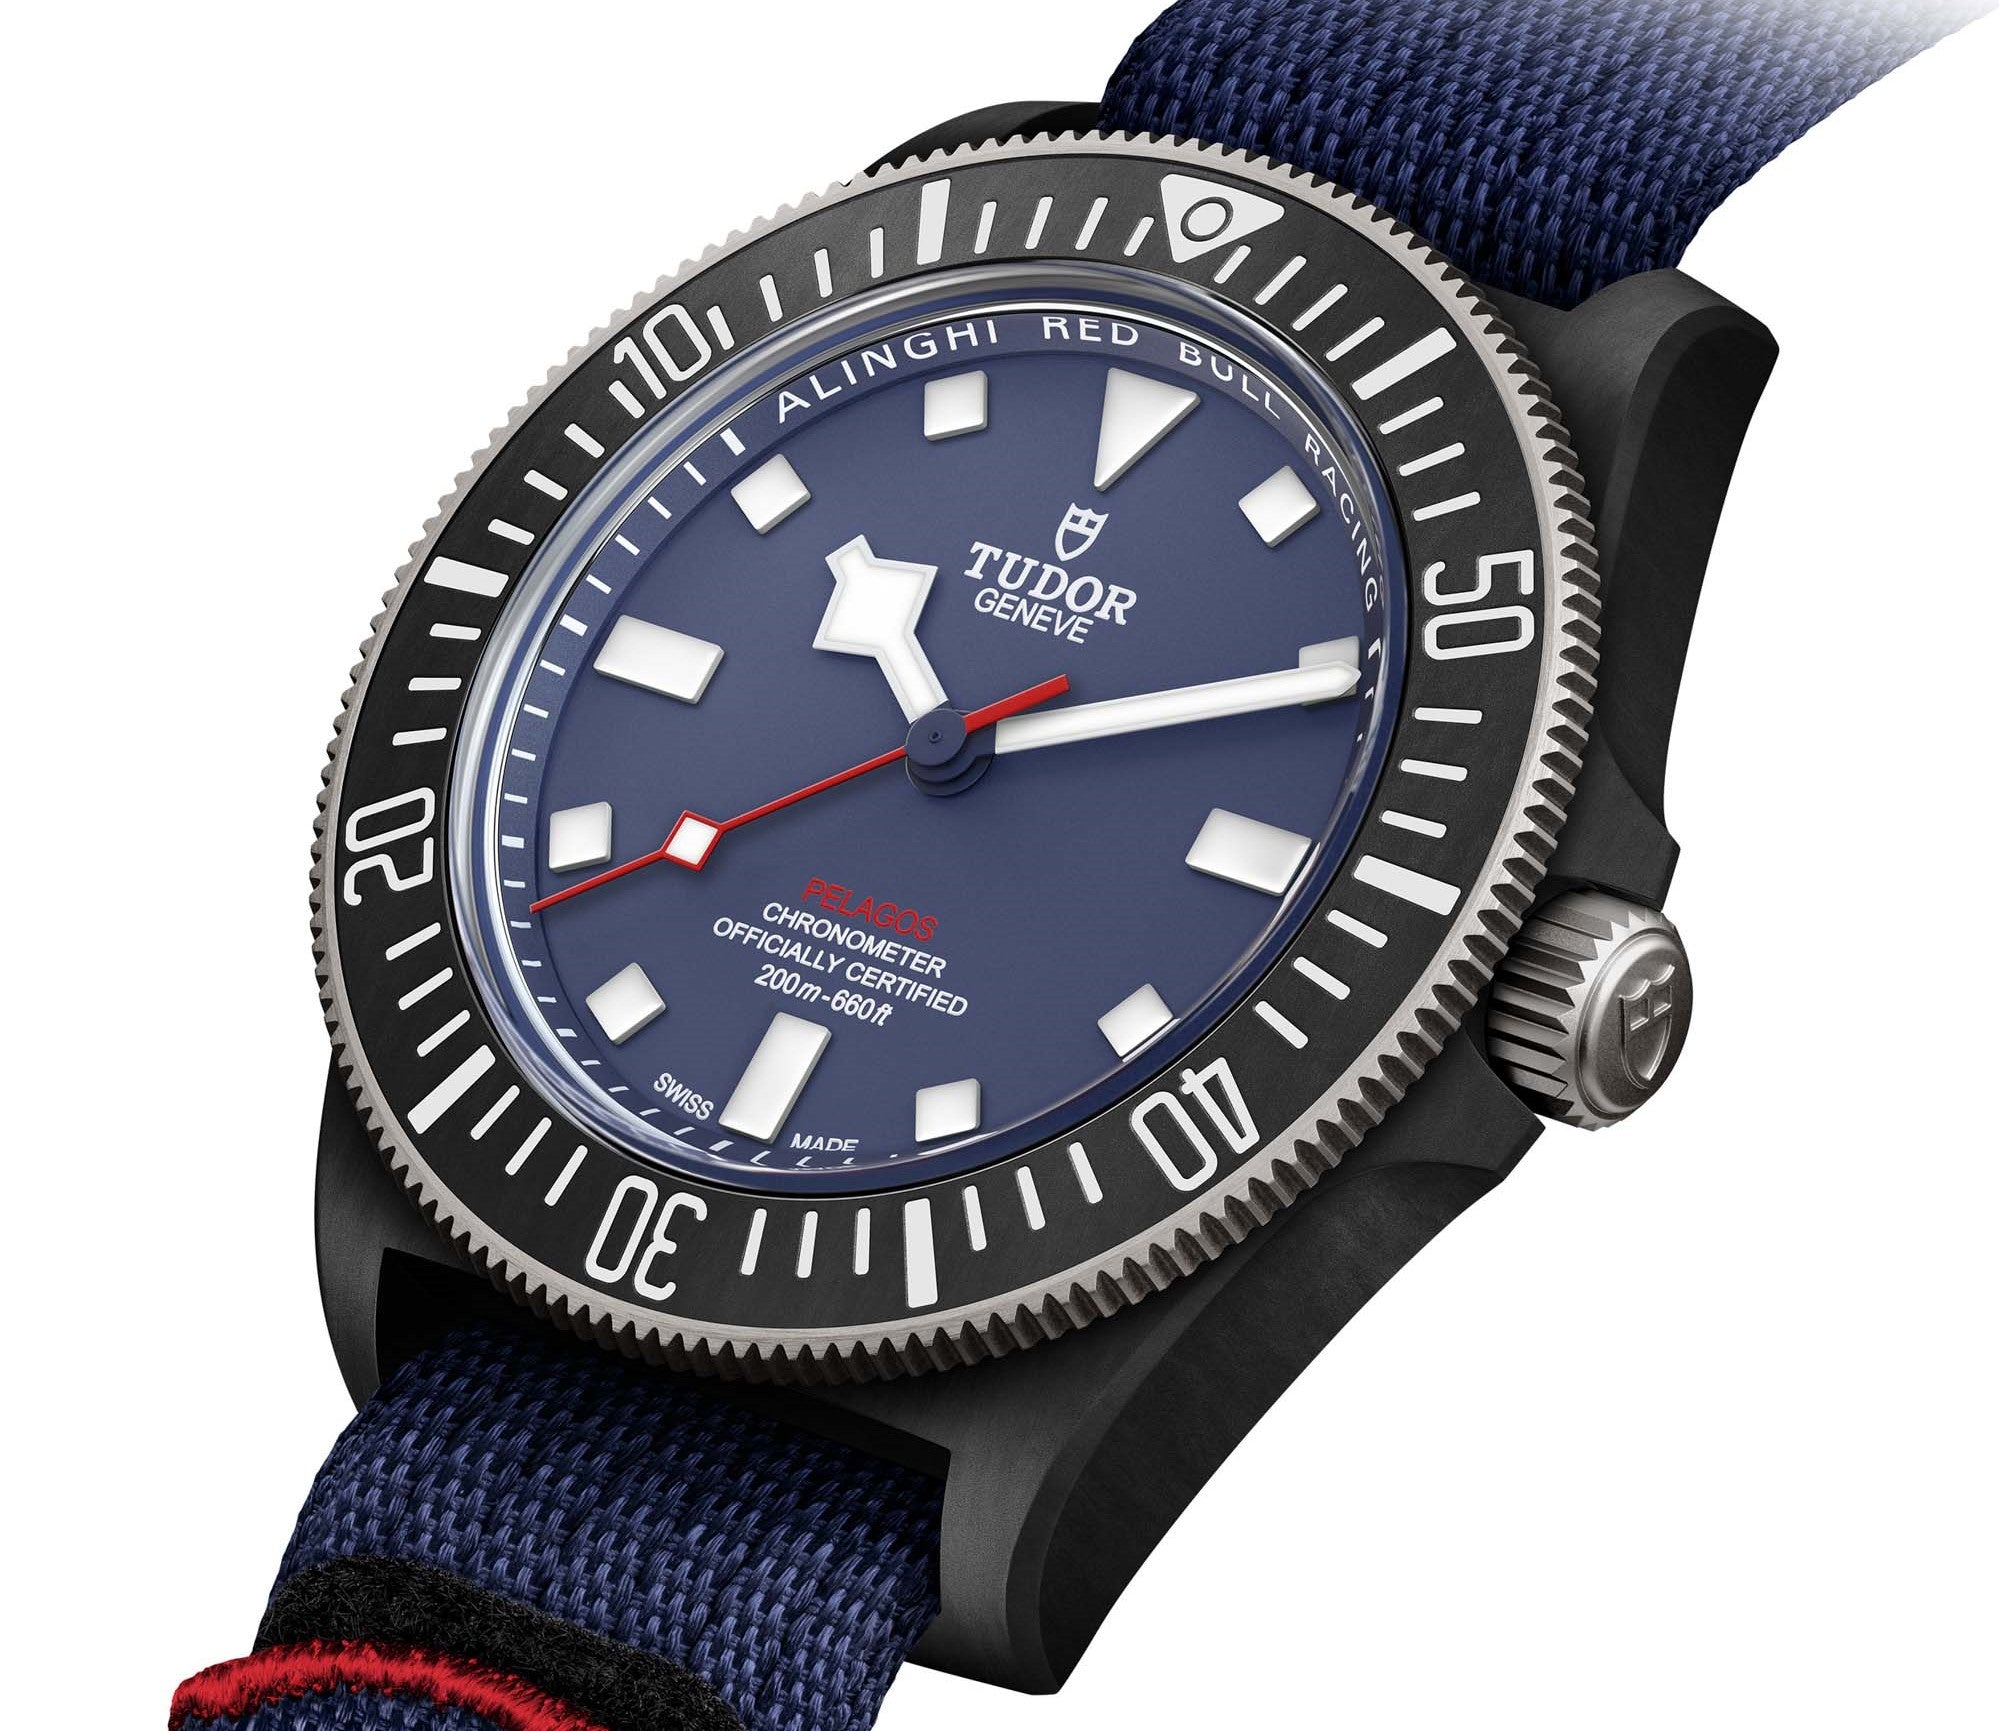 Tudor Pelagos FXD Alinghi Red Bull Racing Time-Only